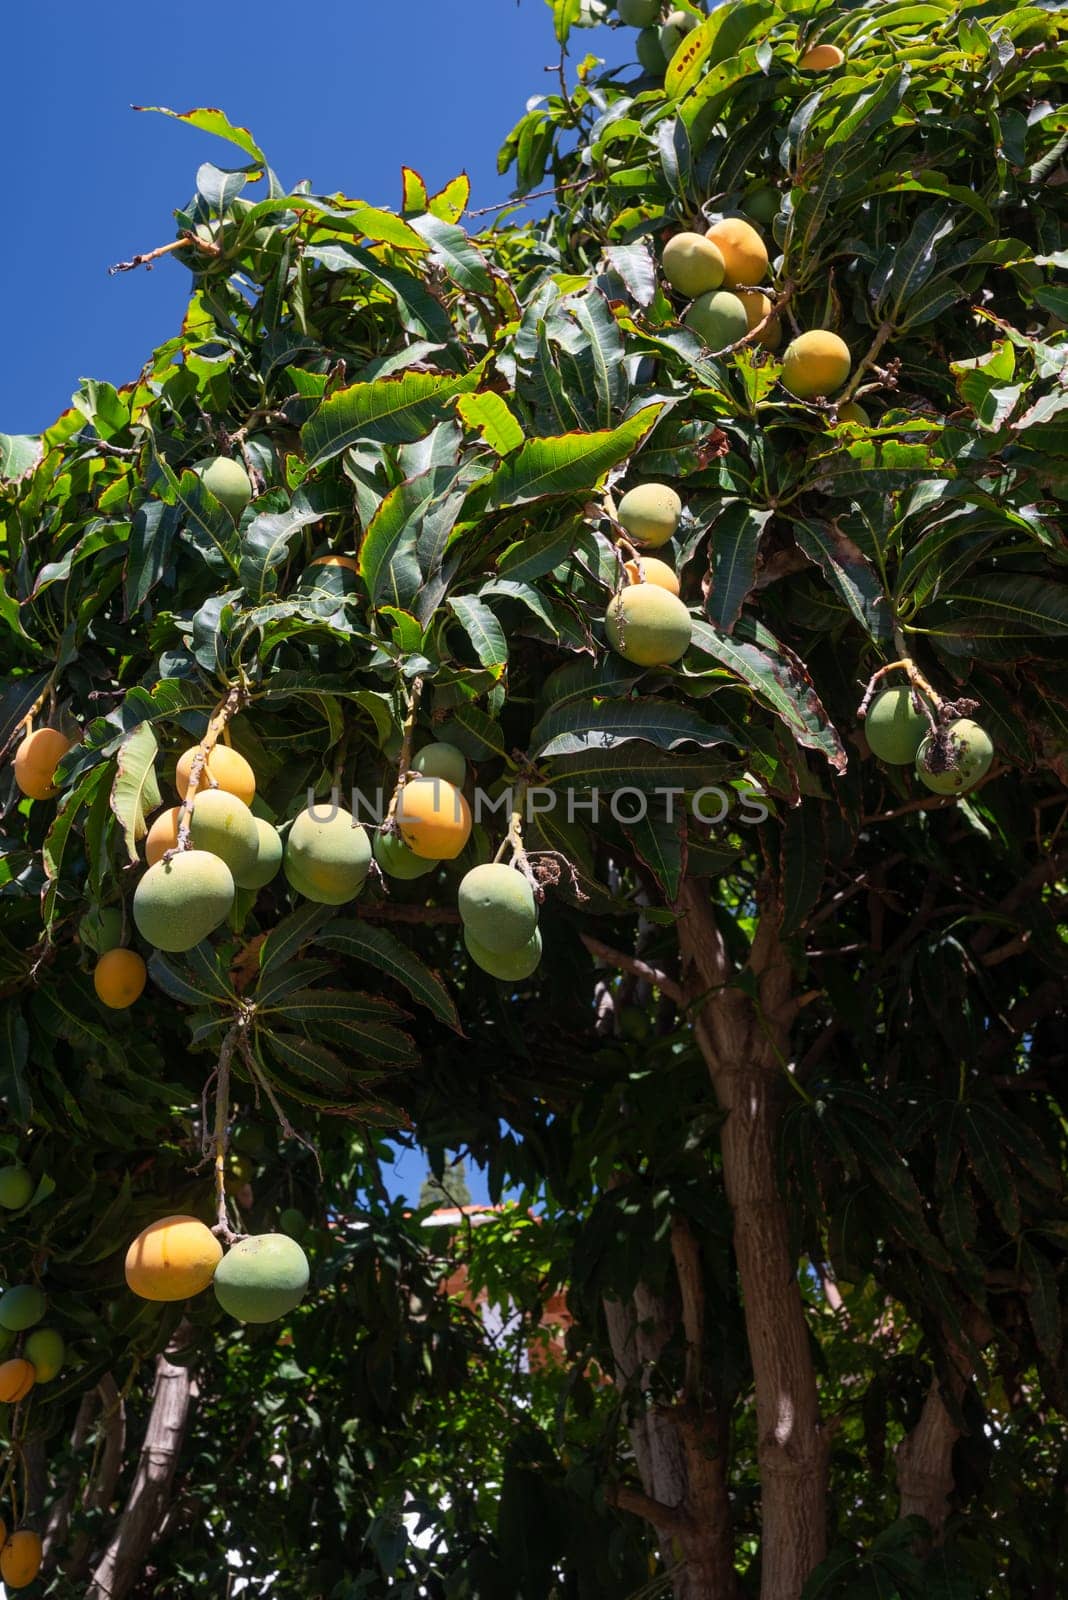 Ripe yellow and green nispero fruit growing on a tree. Japanese loquat, asian tropical fruit. Japanese medlar in the wild nature of Tenerife, Canary islands, Spain. Summer or autumn nature wallpaper